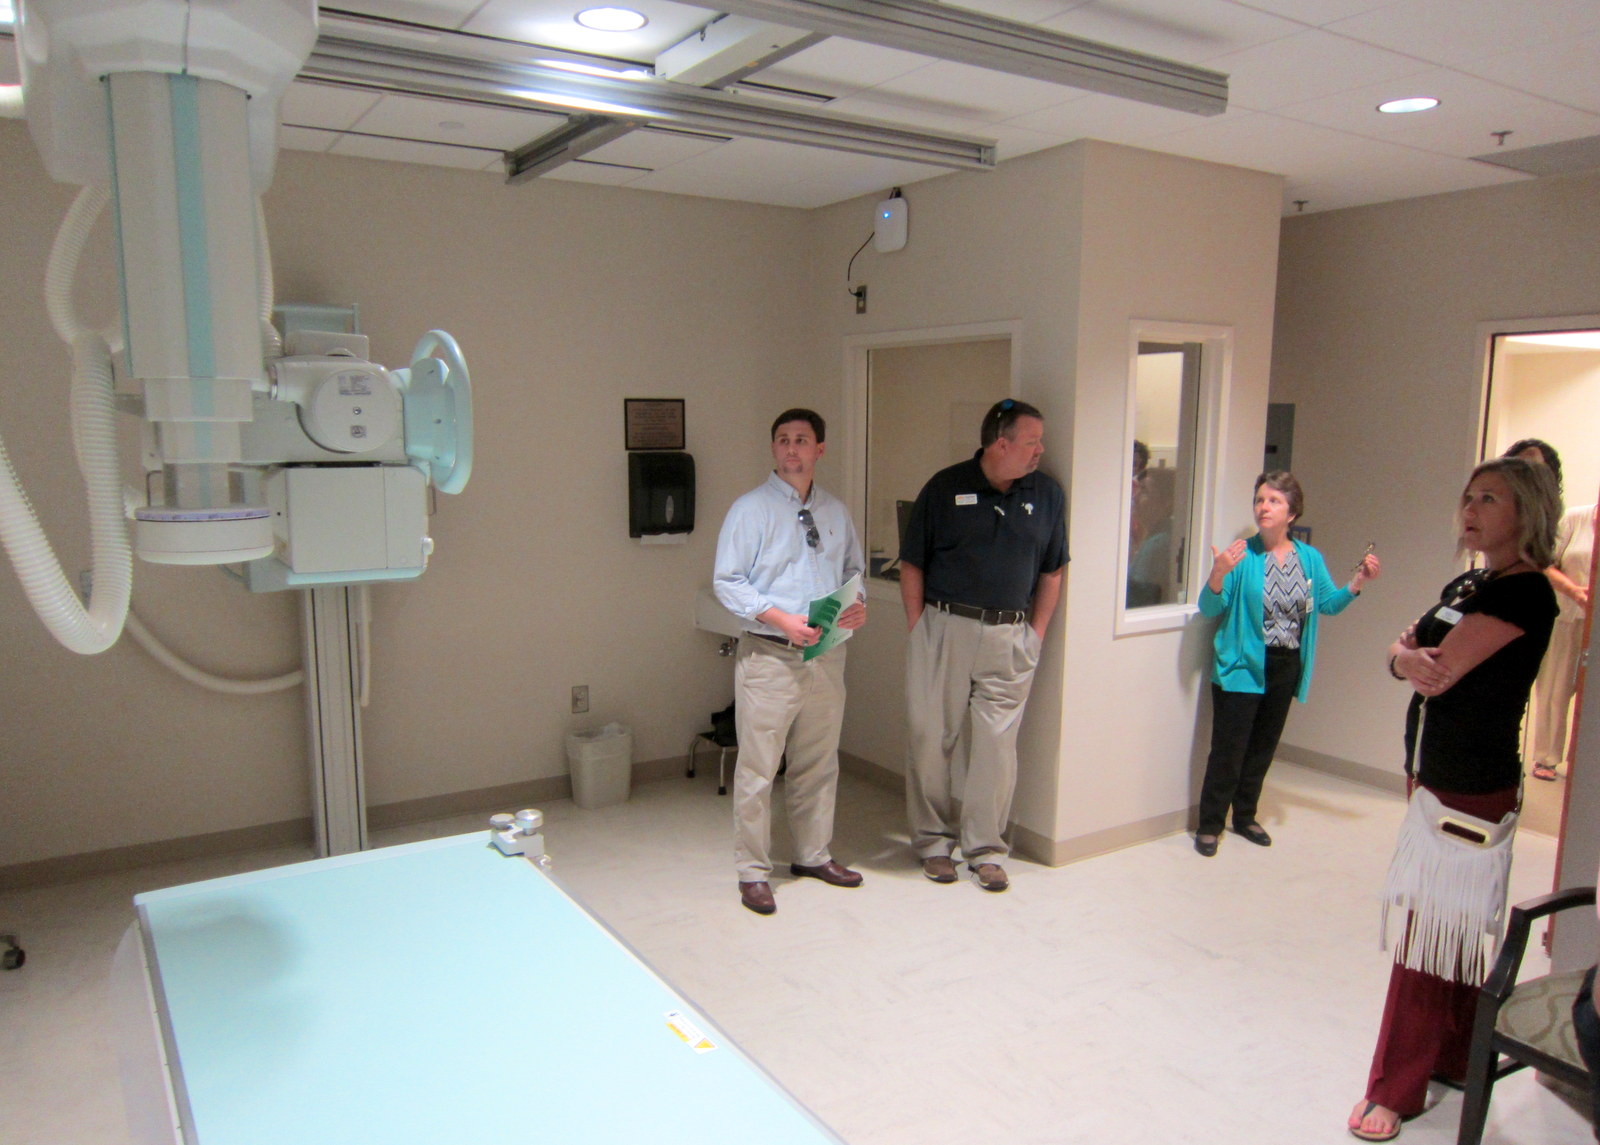 A X-Ray room in the LMC facility.